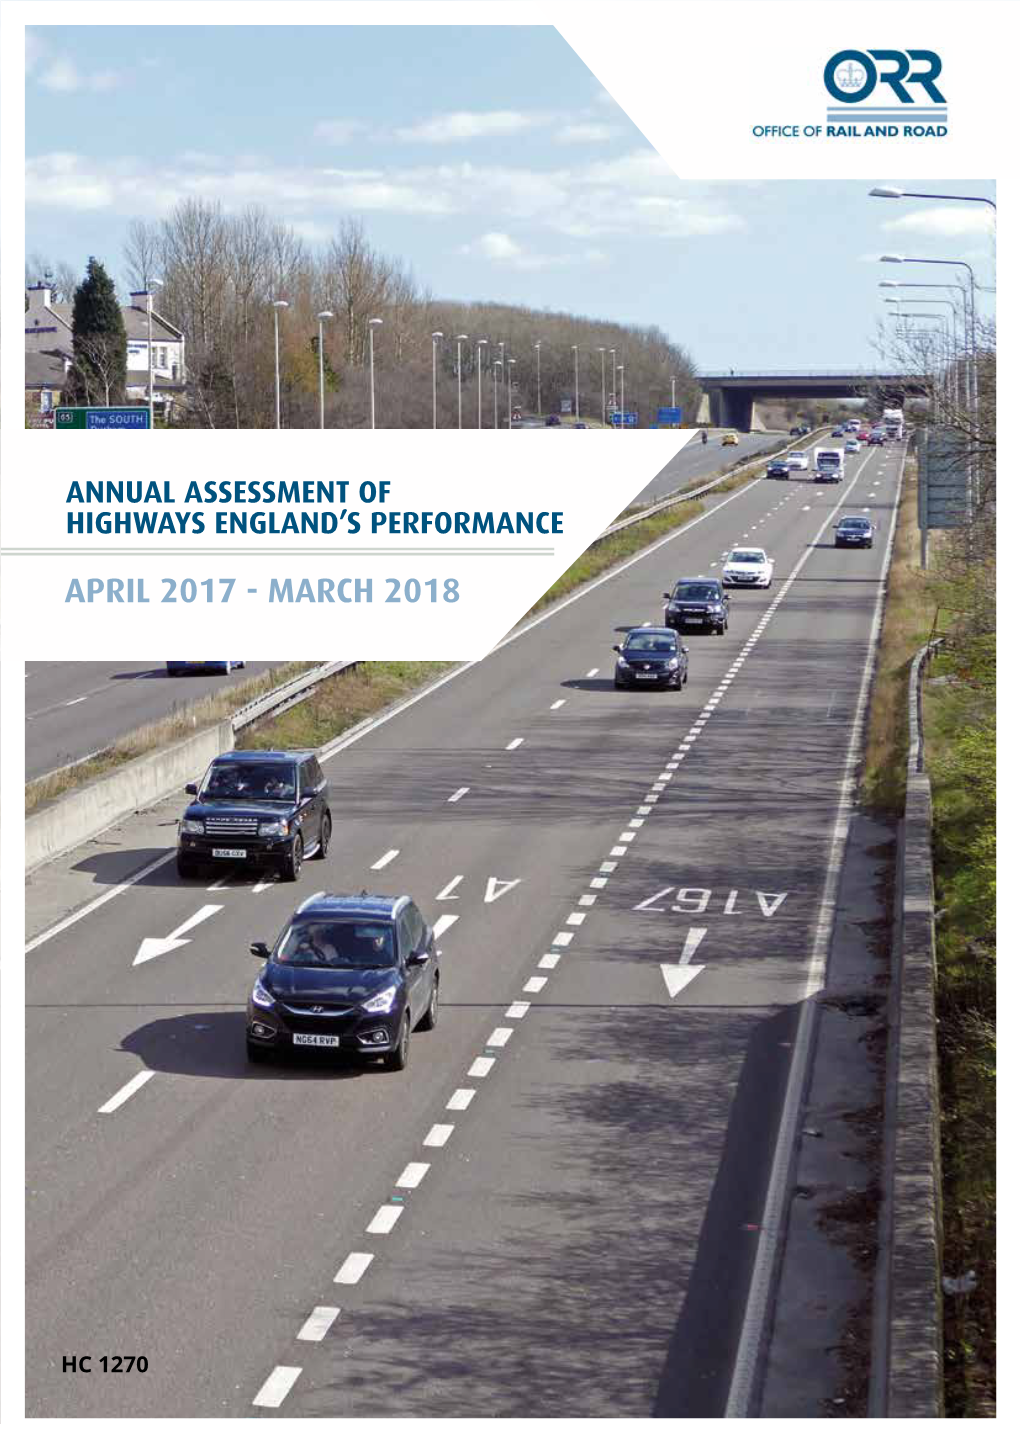 Annual Assessment of Highways England's Performance 2017-18